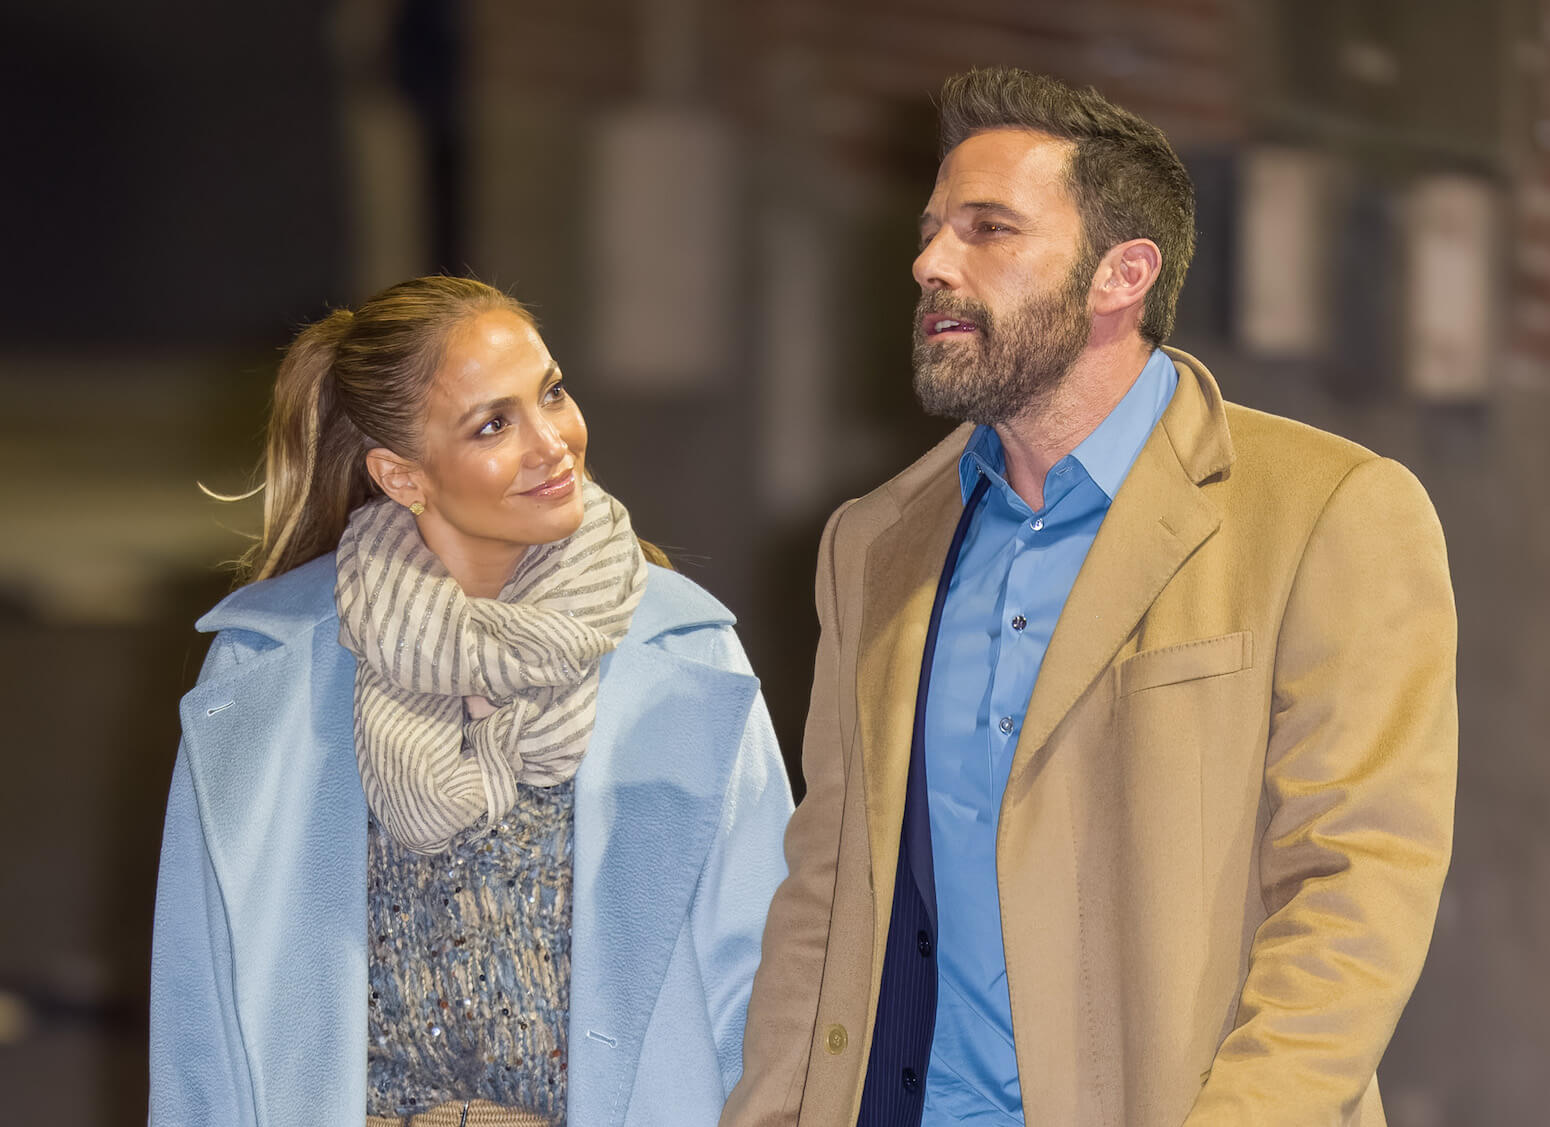 Jennifer Lopez and Ben Affleck walking through the city in 2021